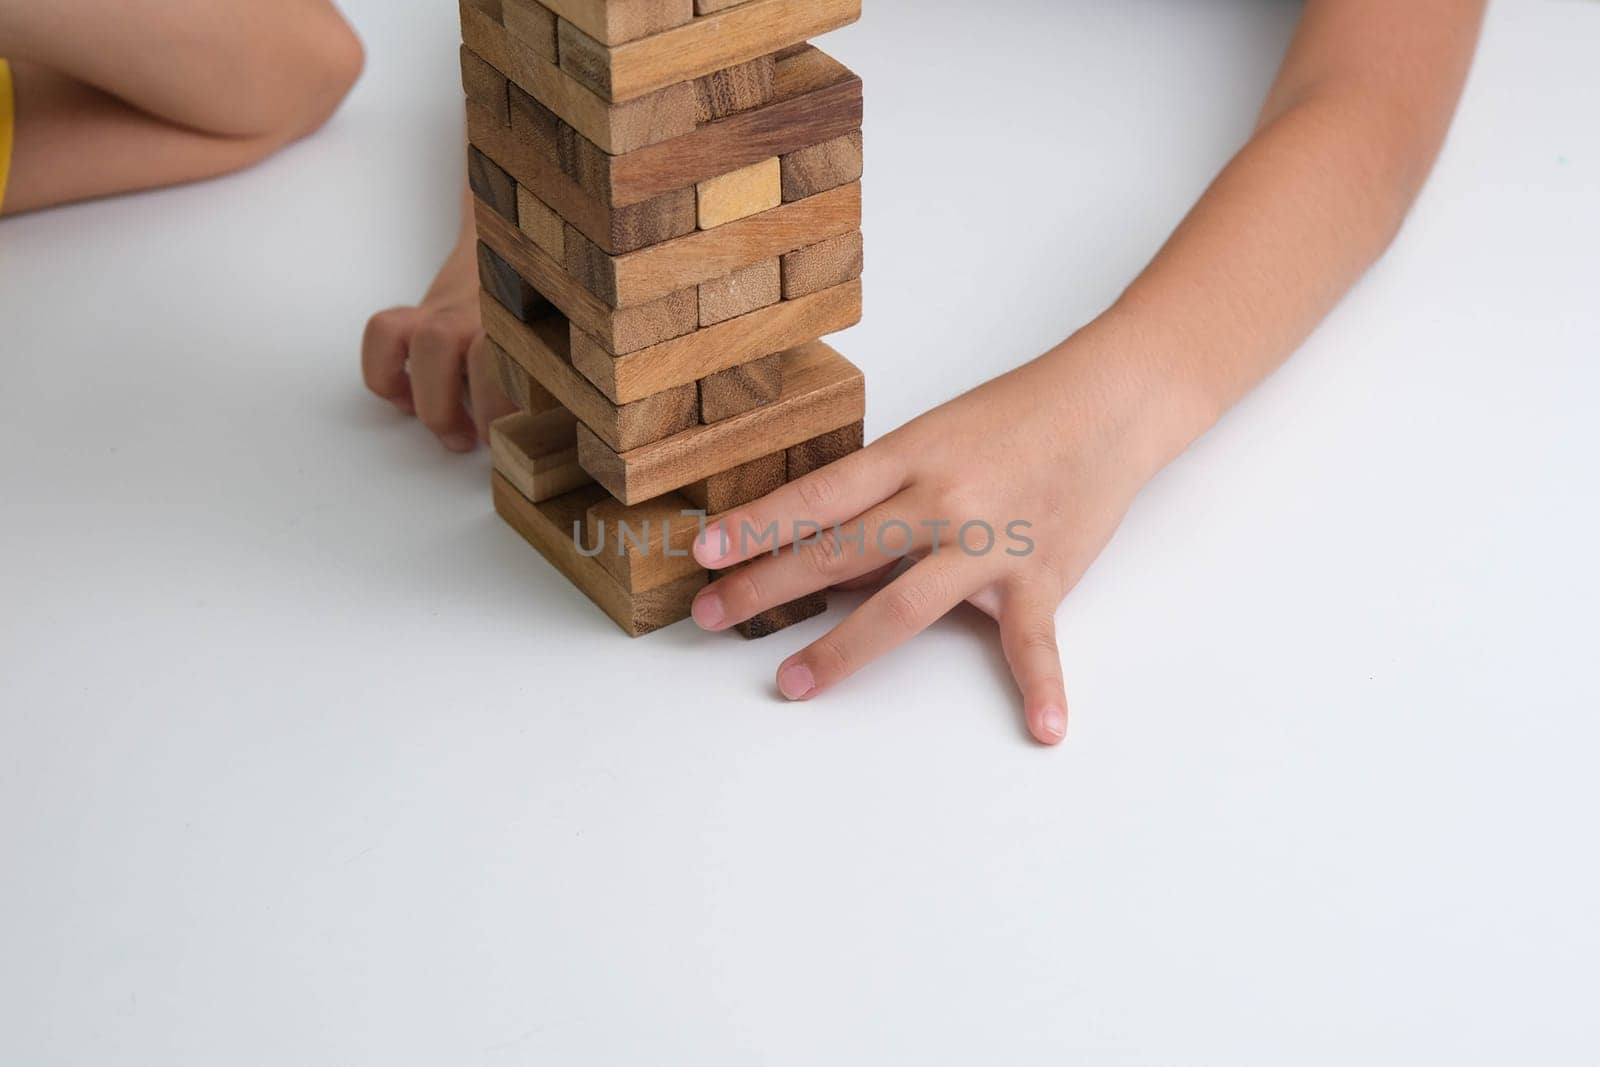 Cute Asian siblings having fun playing Jenga together. Two children playing Jenga board game on table in room at home. Wooden puzzles are games that increase intelligence for children. Educational toys for children. by TEERASAK